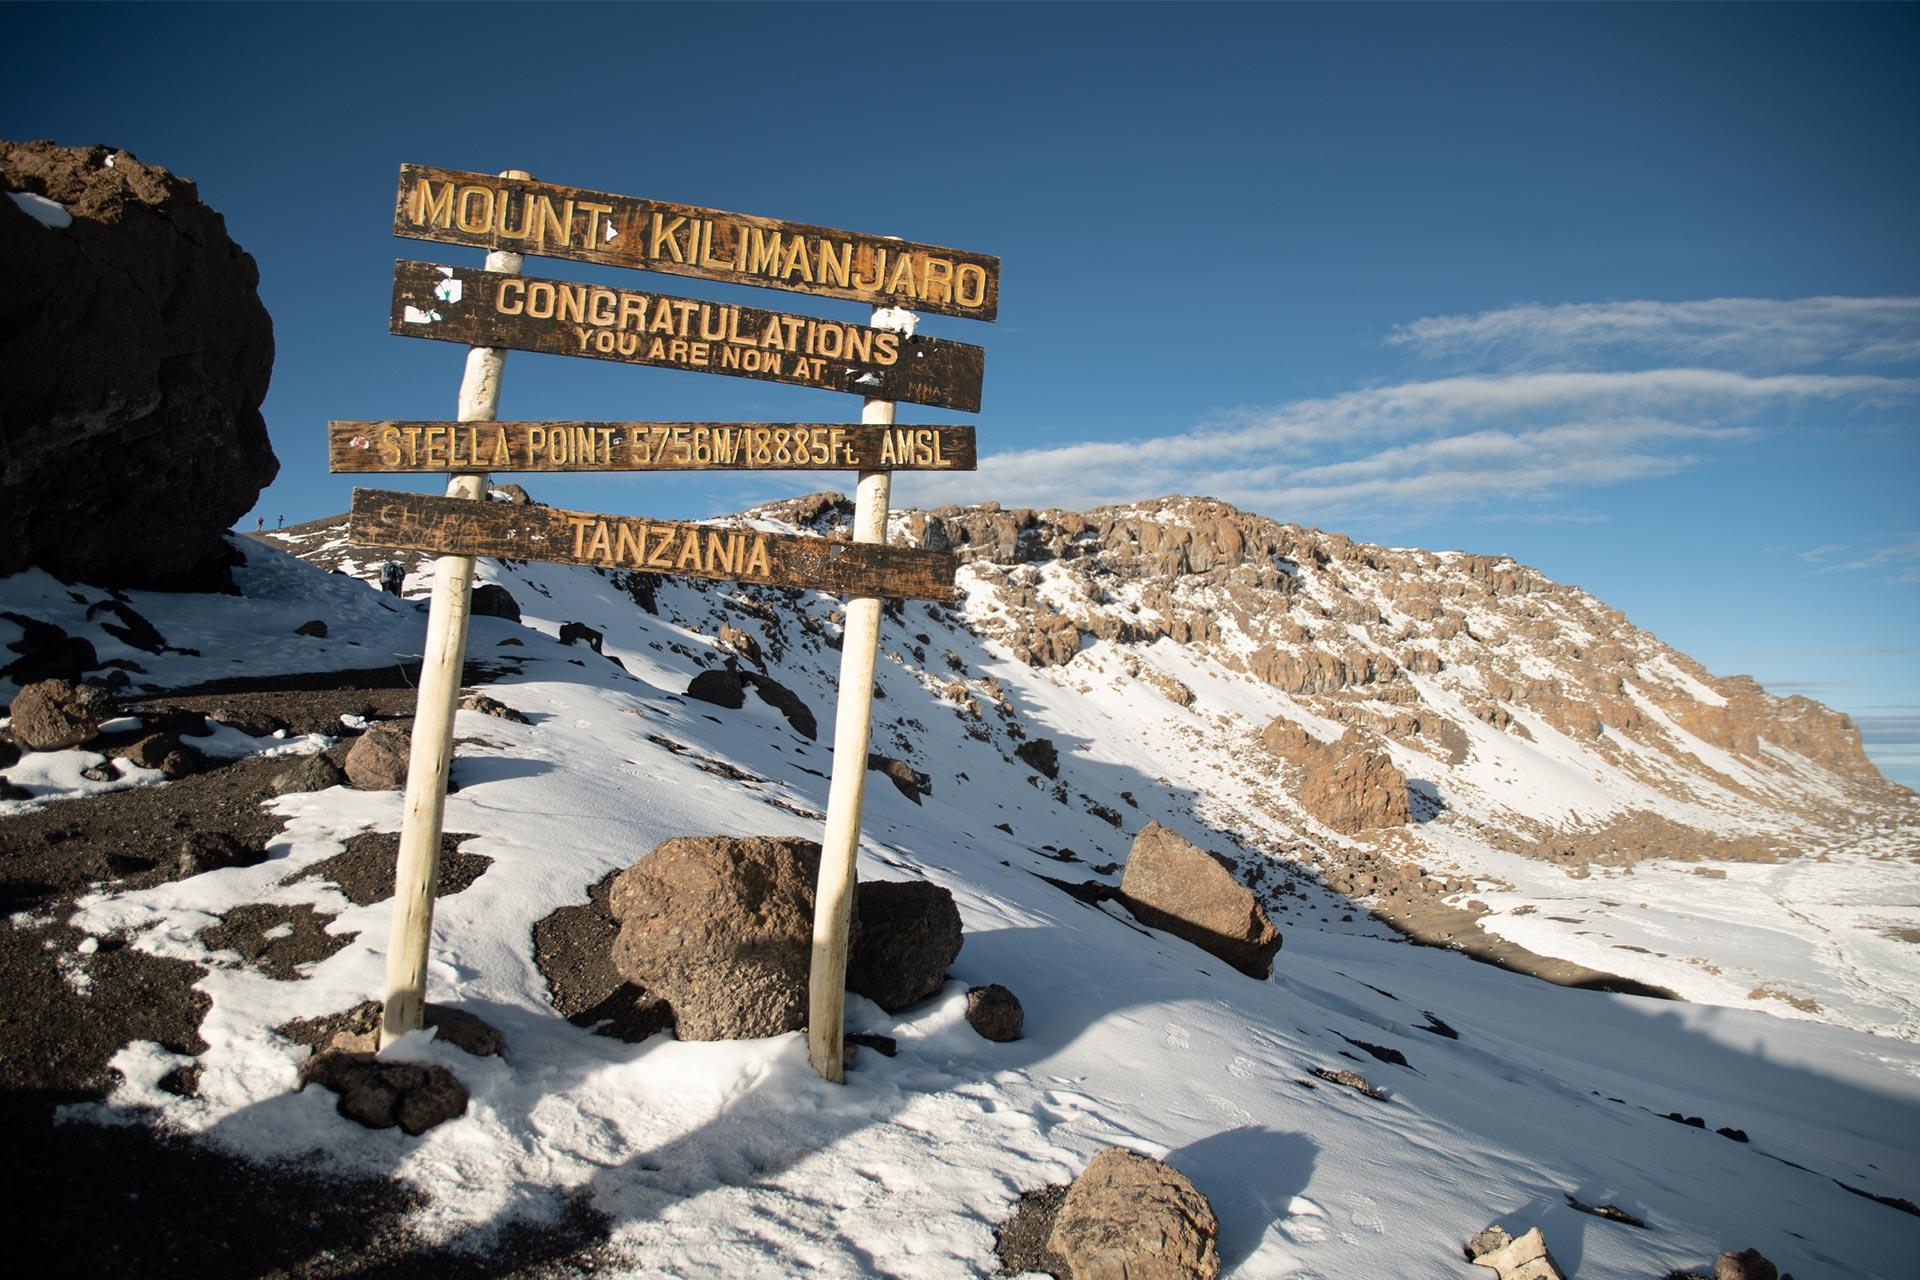 You are now at Stella Point at 5756 meter on Mount Kilimanjaro